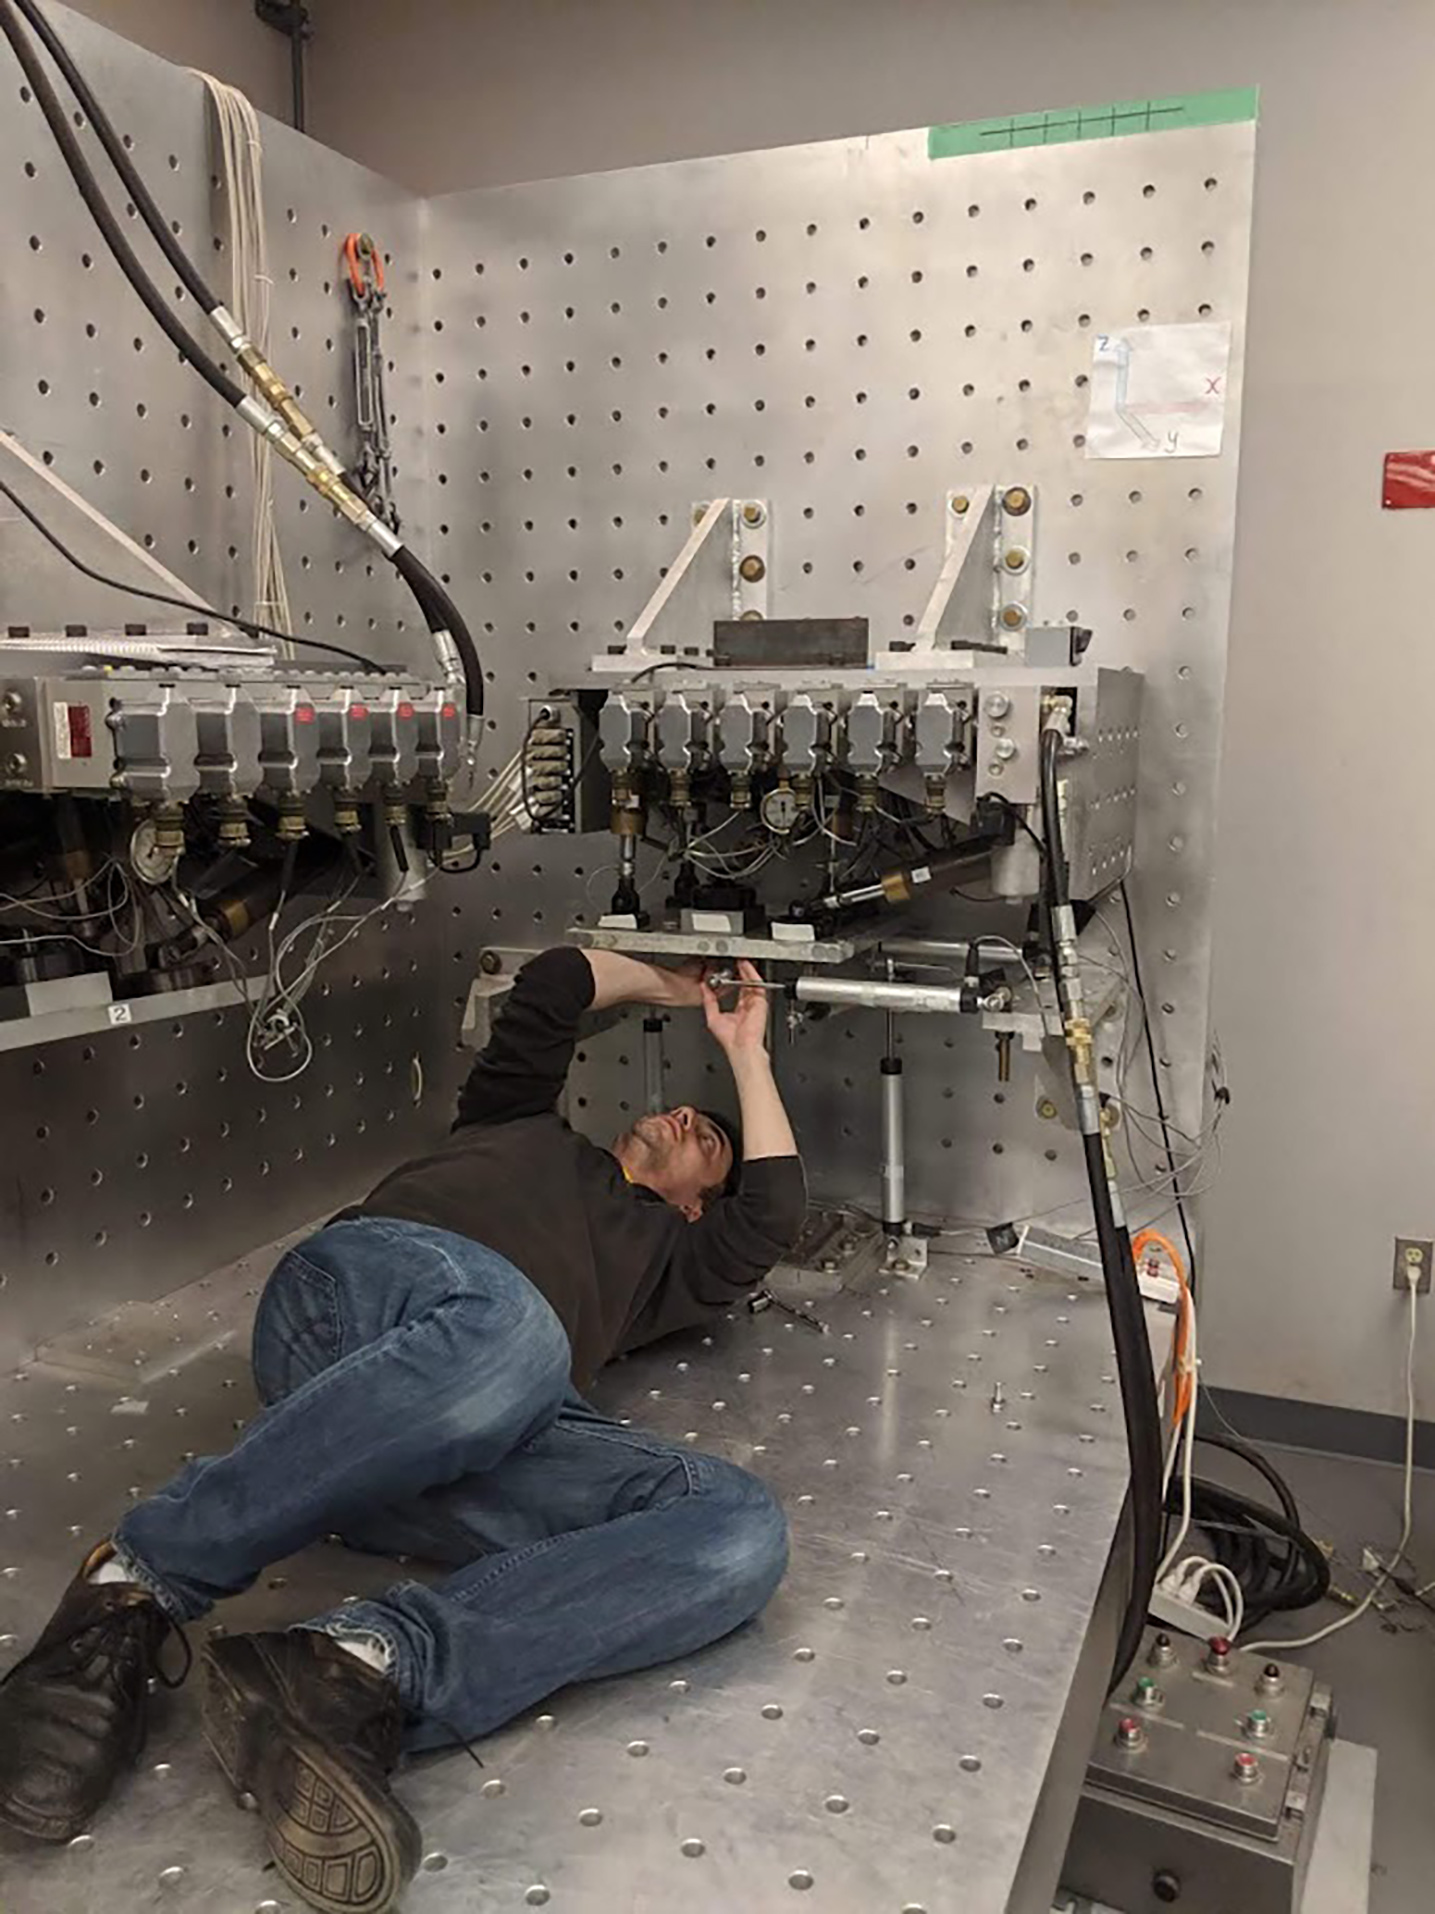 Najafi lays on his back under a testing unit, adjusting an experimental setup with tools lying around him.